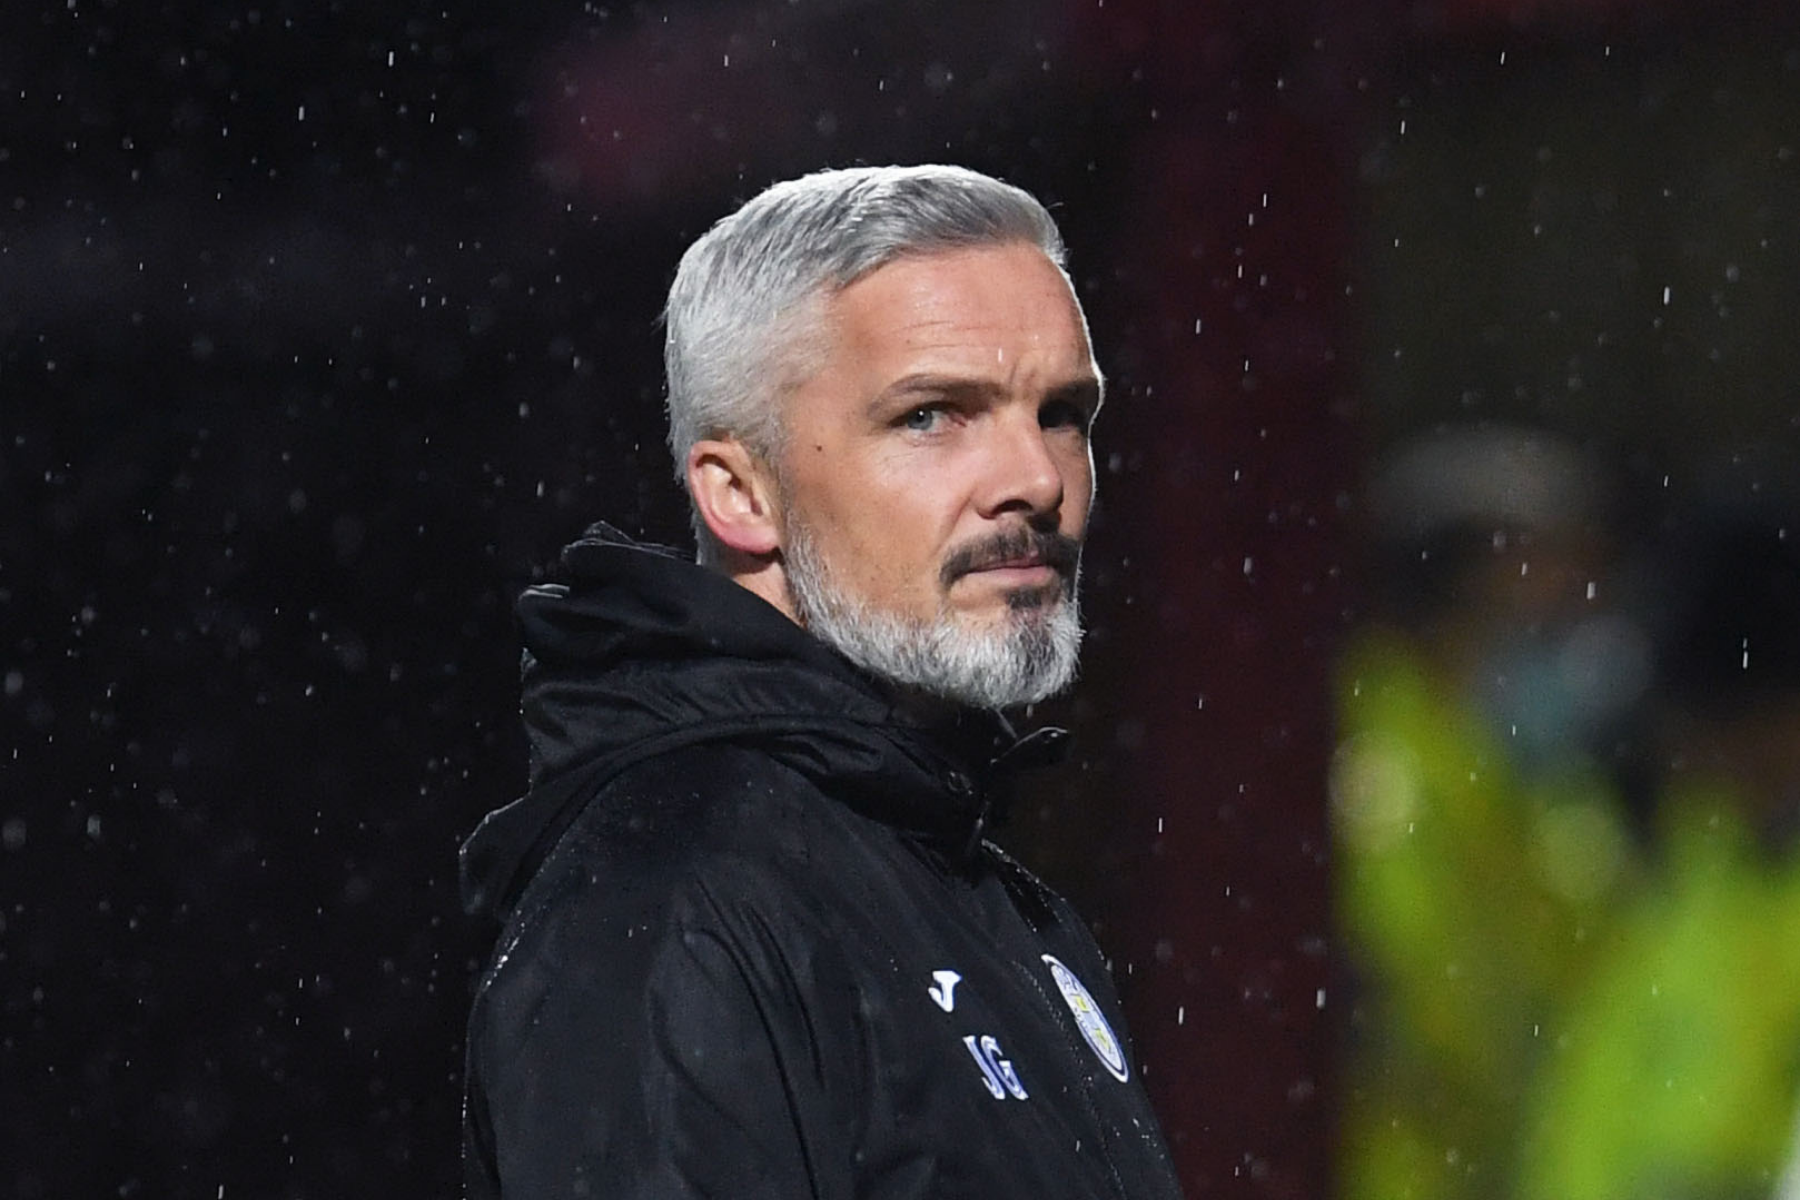 Hibs Covid outbreak a 'reality check' for all clubs, says Jim Goodwin